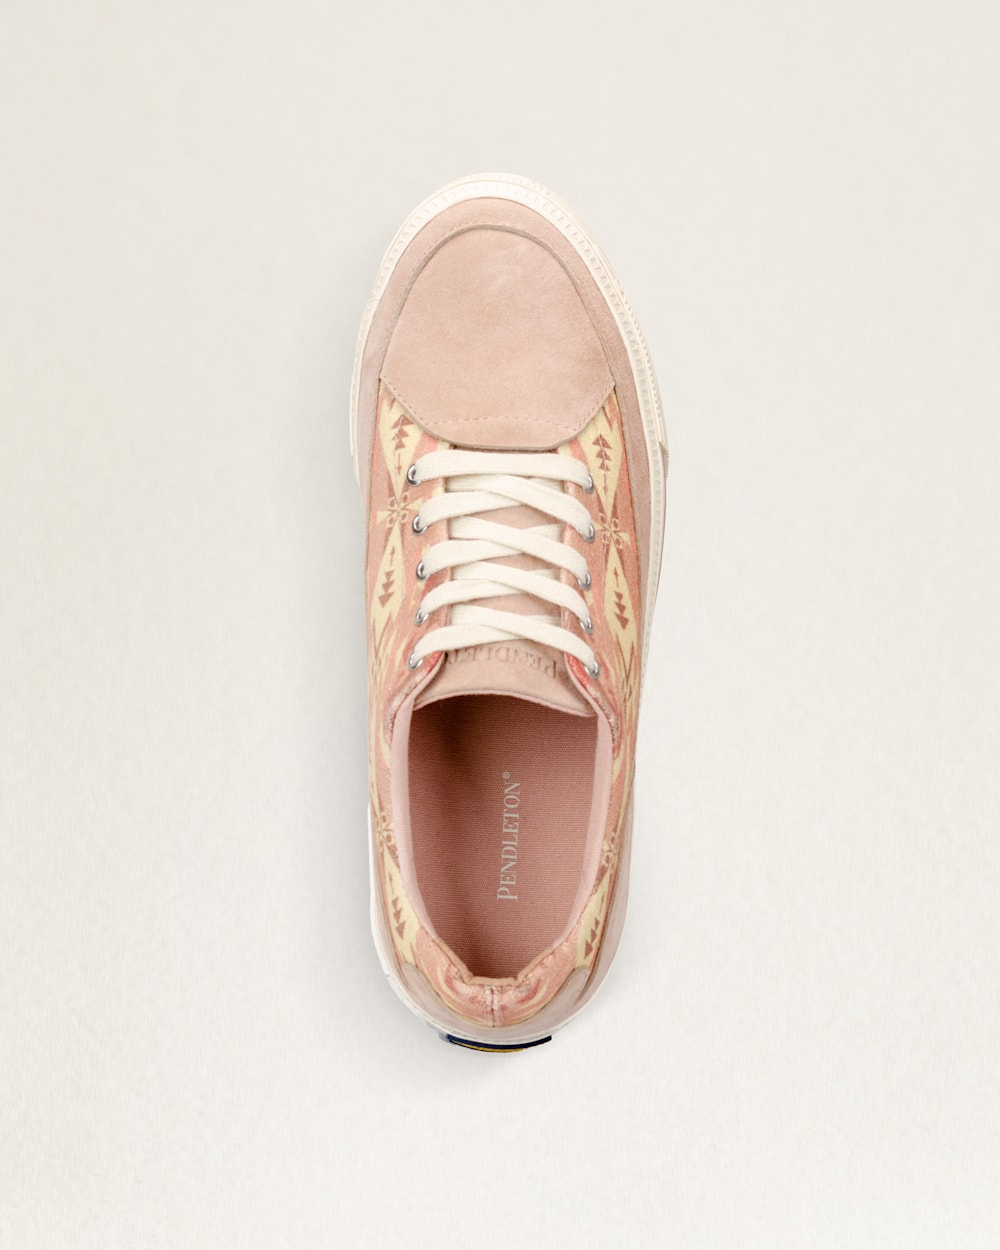 ALTERNATE VIEW OF WOMEN'S VULCANIZED SNEAKERS IN ROSE TUCSON image number 5